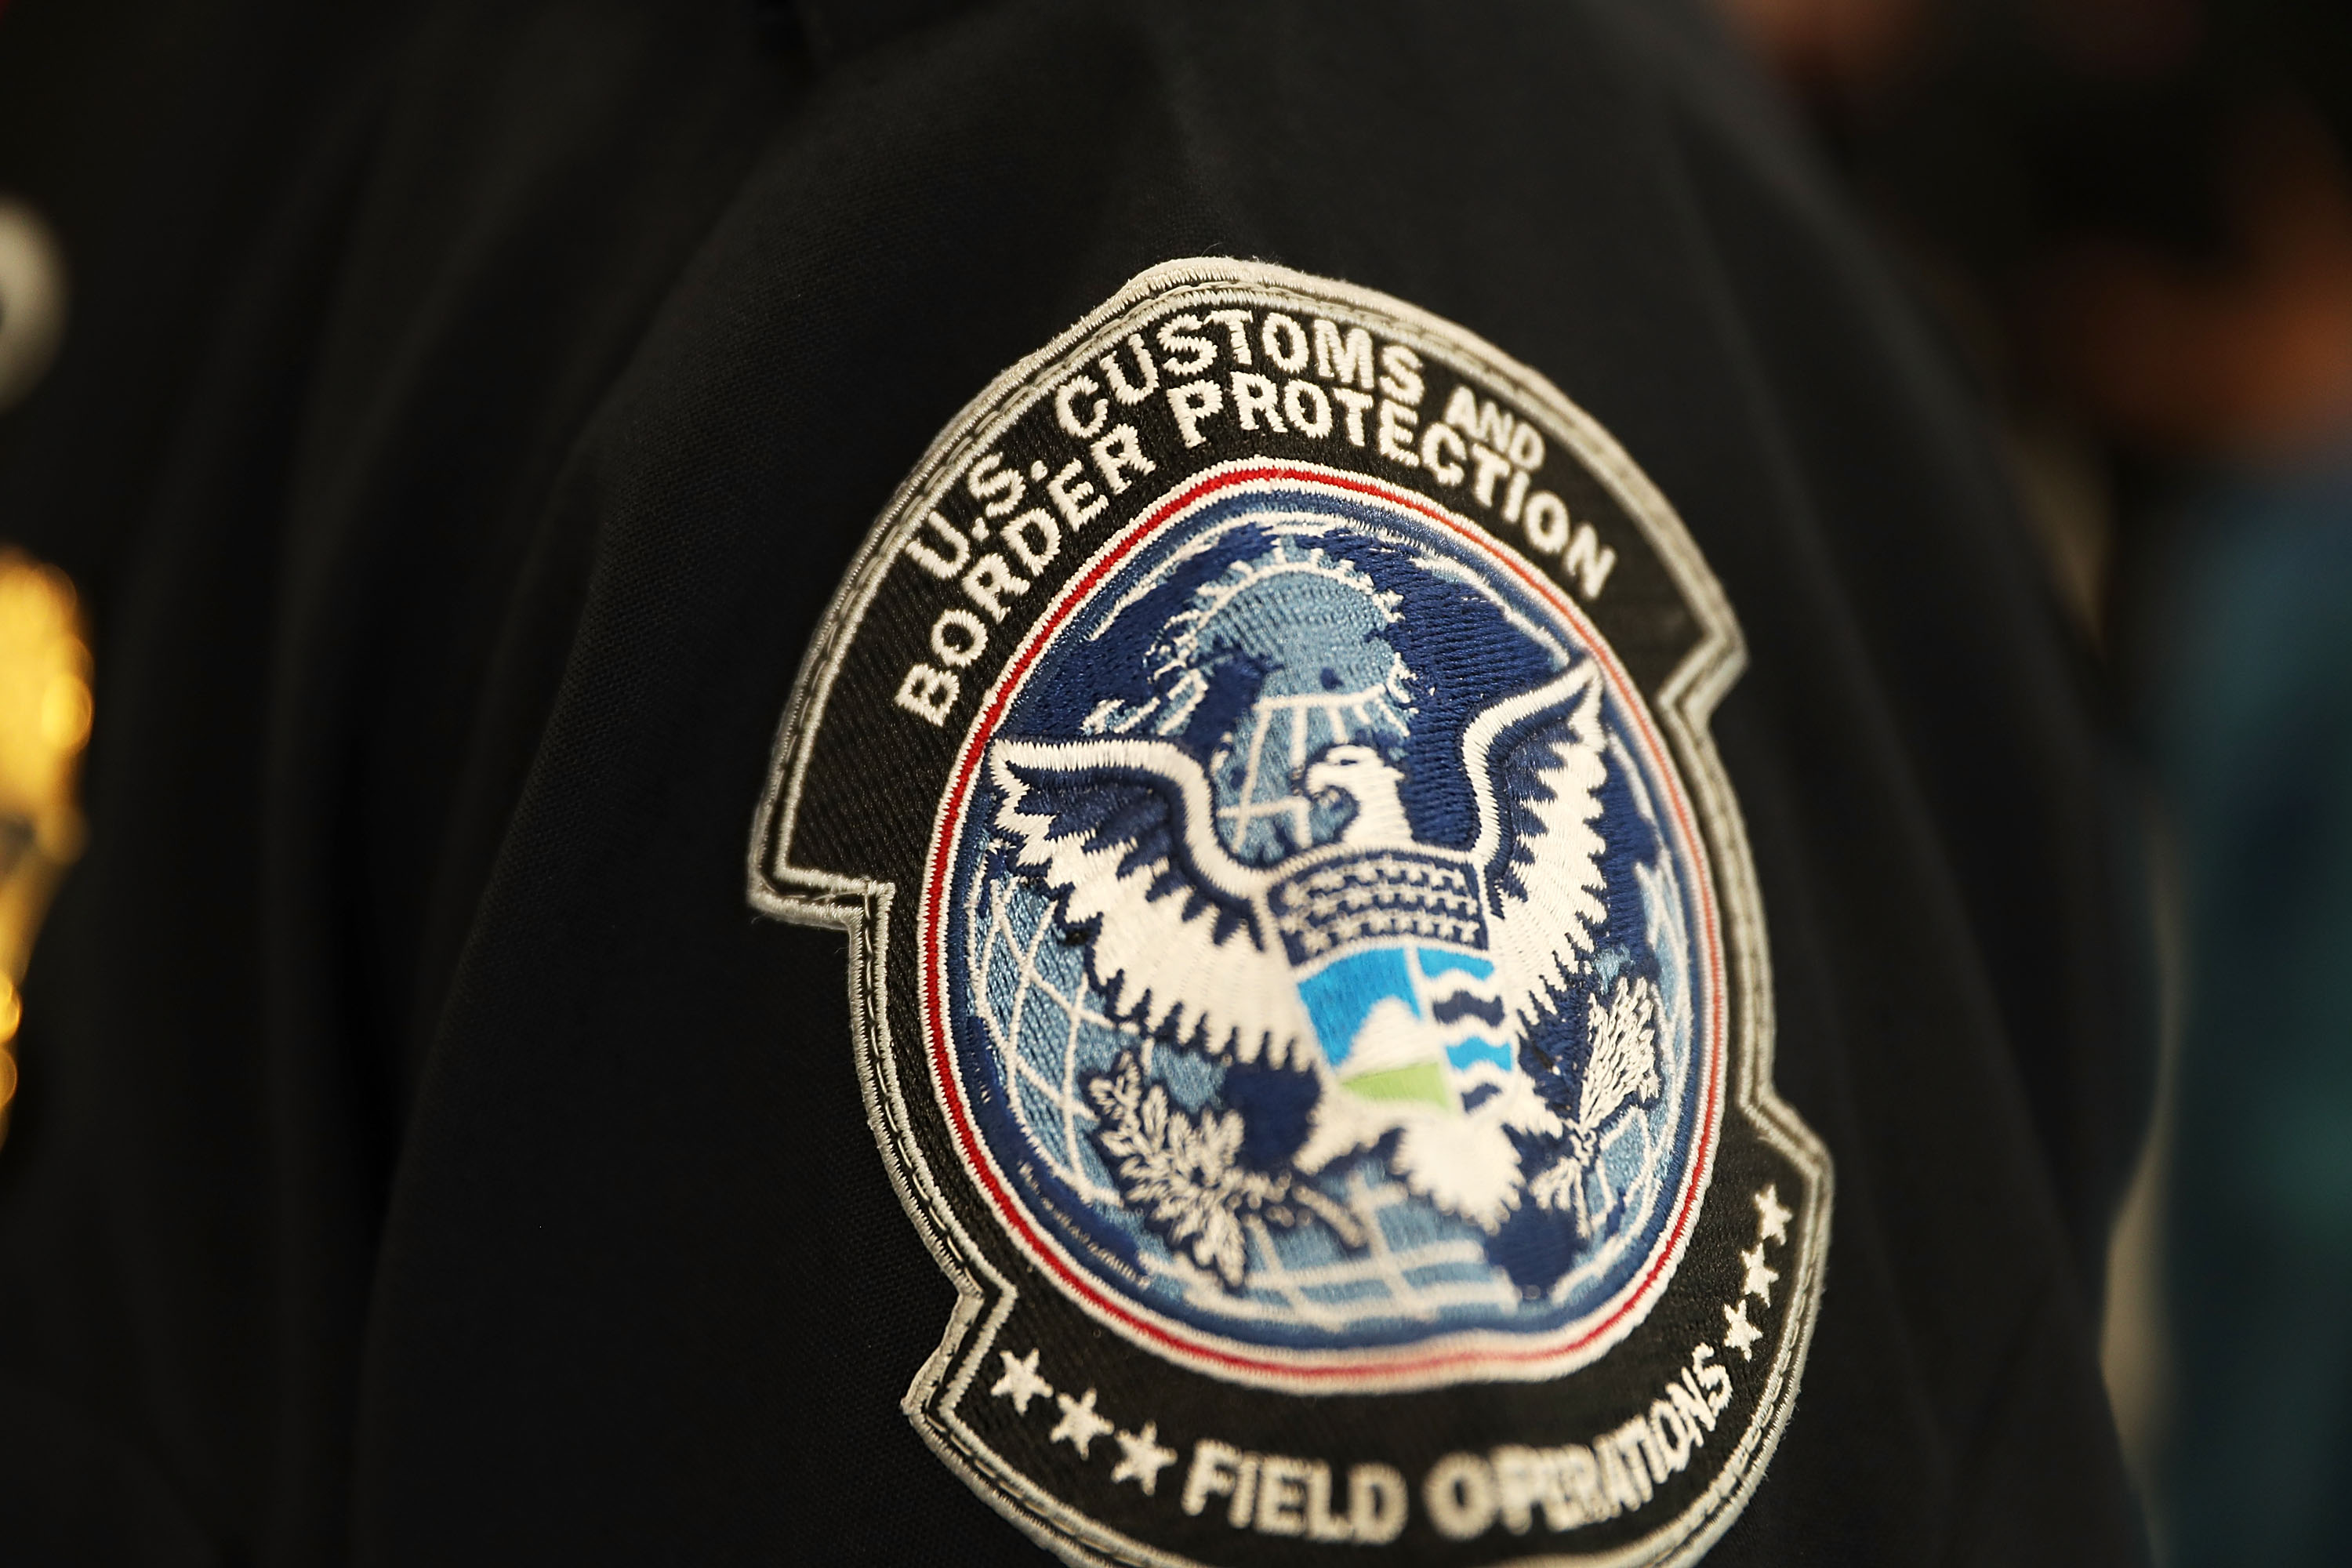 A patch is seen on the sleeve of a U.S. Customs and Border Protection officer at Miami International Airport on Feb. 27, 2018 in Miami, Florida. (Joe Raedle—Getty Images)